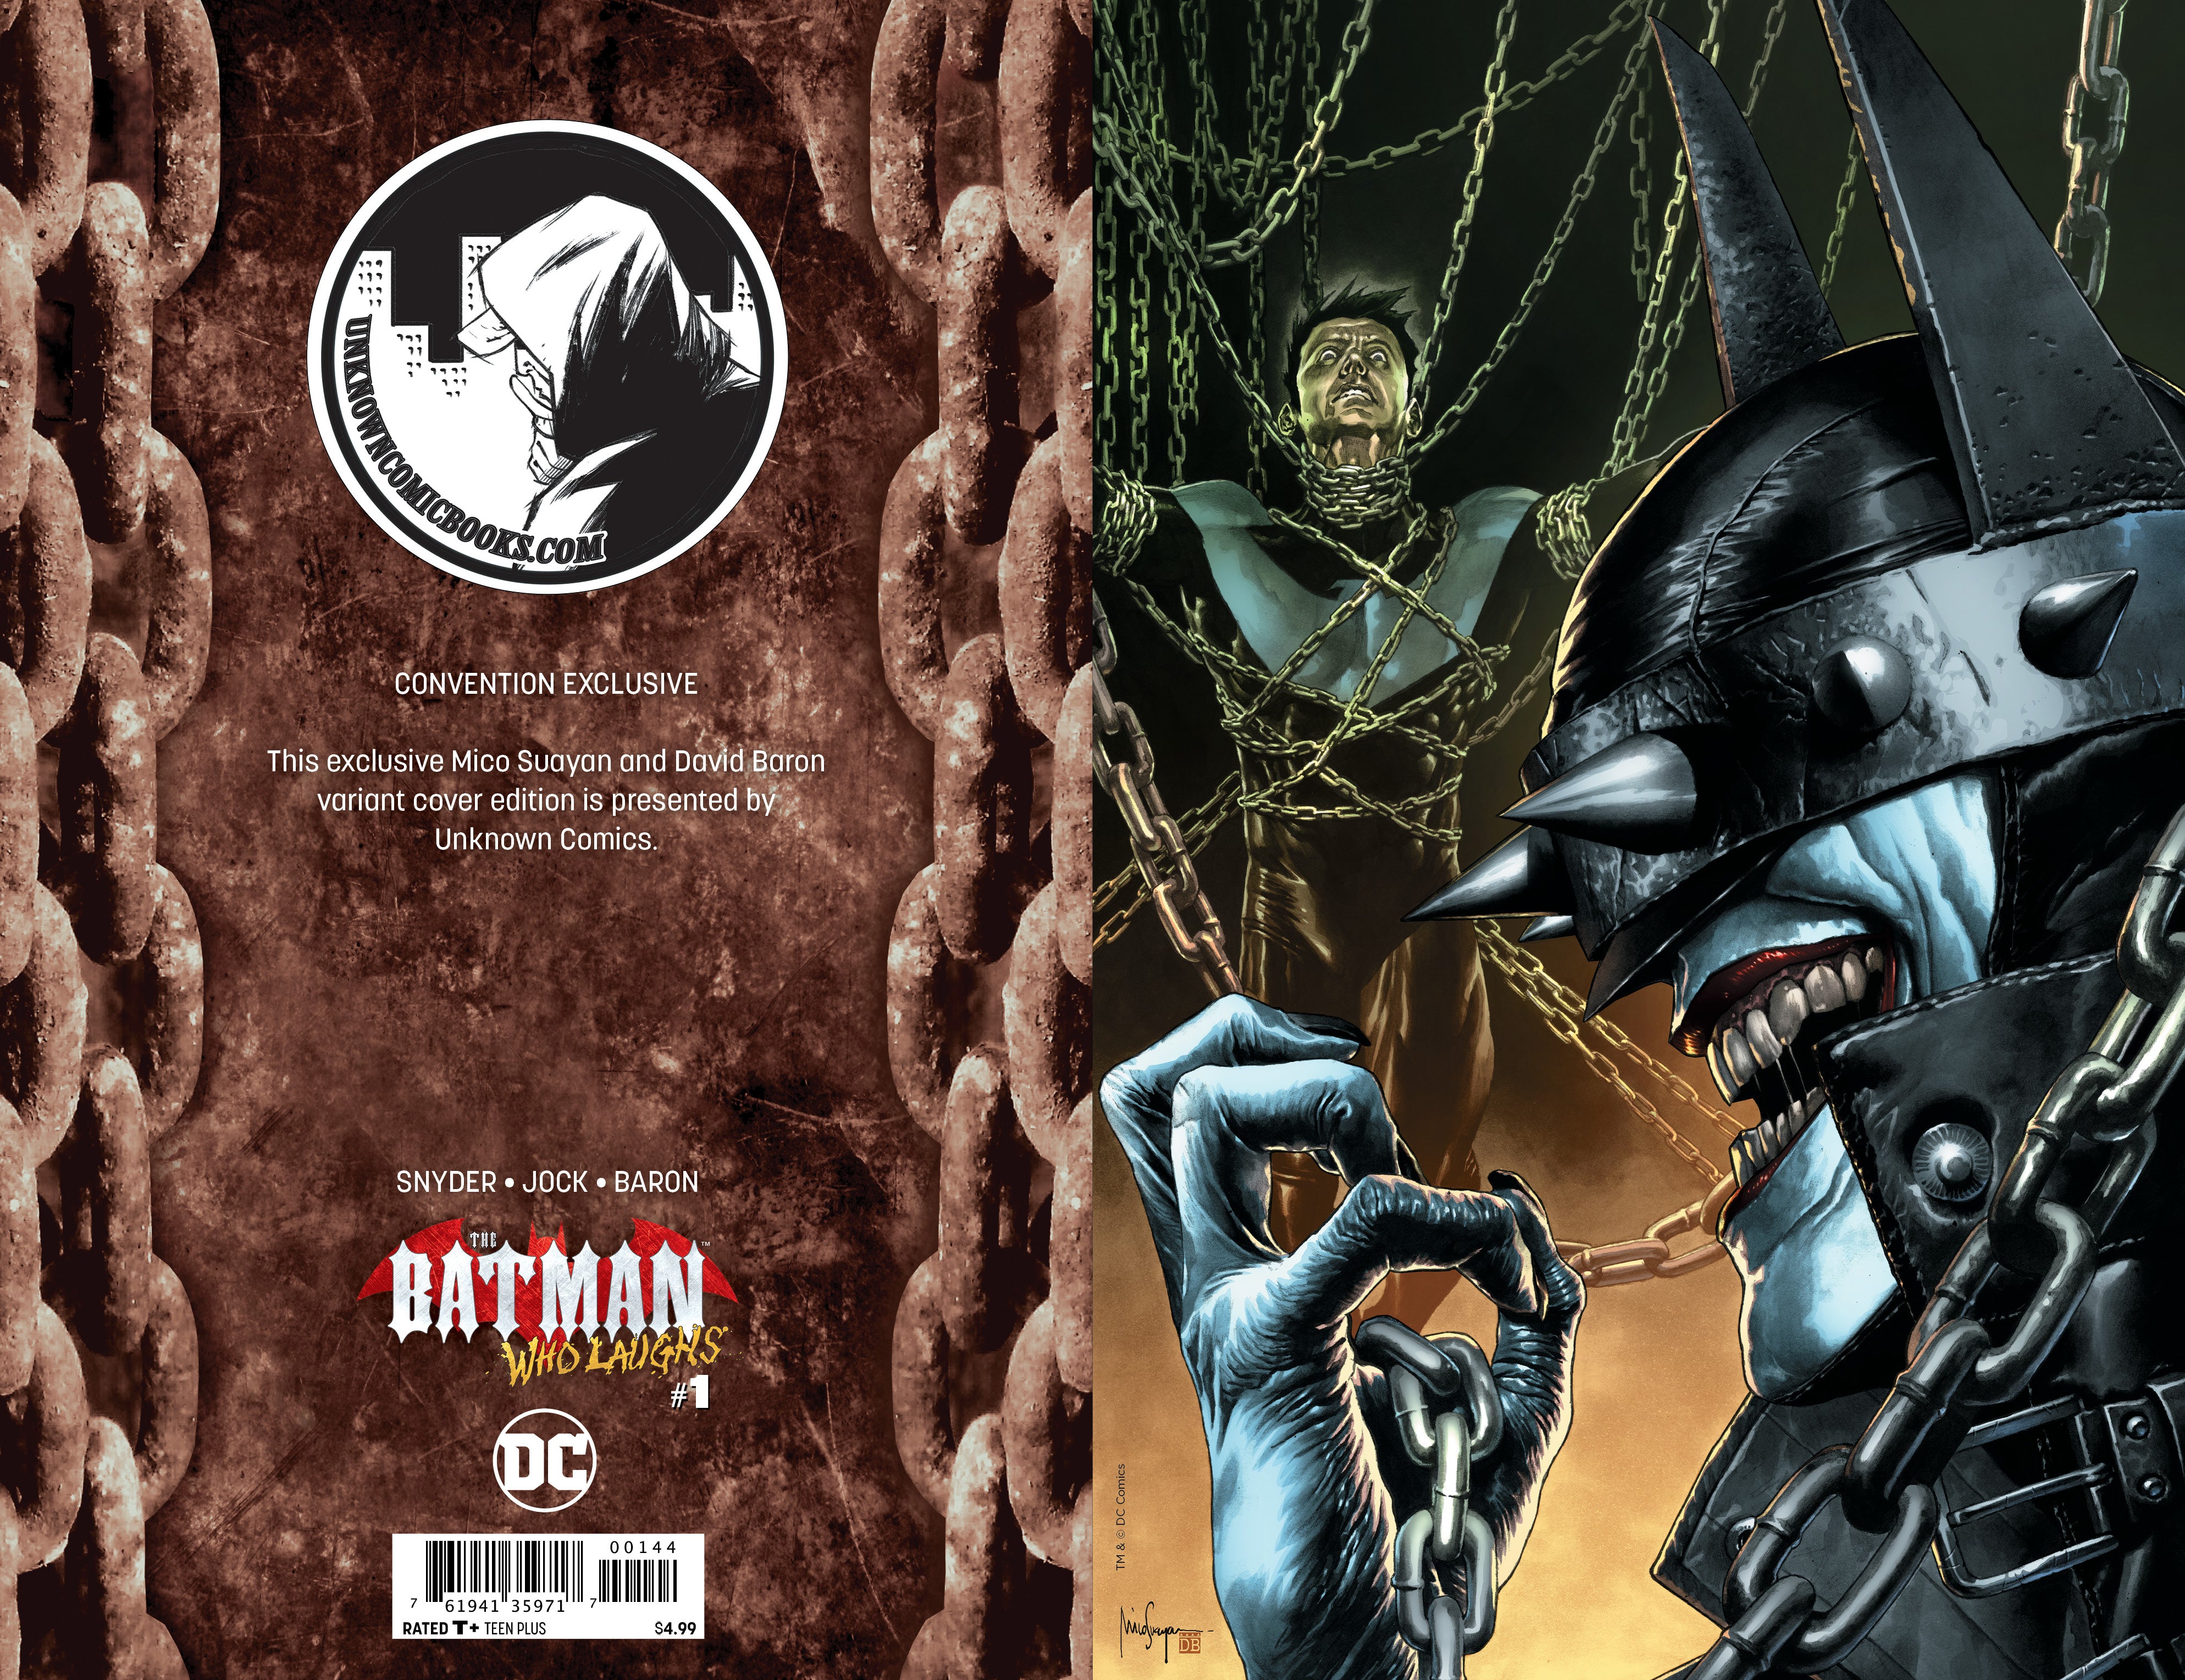 BATMAN WHO LAUGHS #1 (OF 6) UNKNOWN COMIC BOOKS EXCLUSIVE SUAYAN UNMASKED CONVENTION EXCLUSIVE 1/30/2019